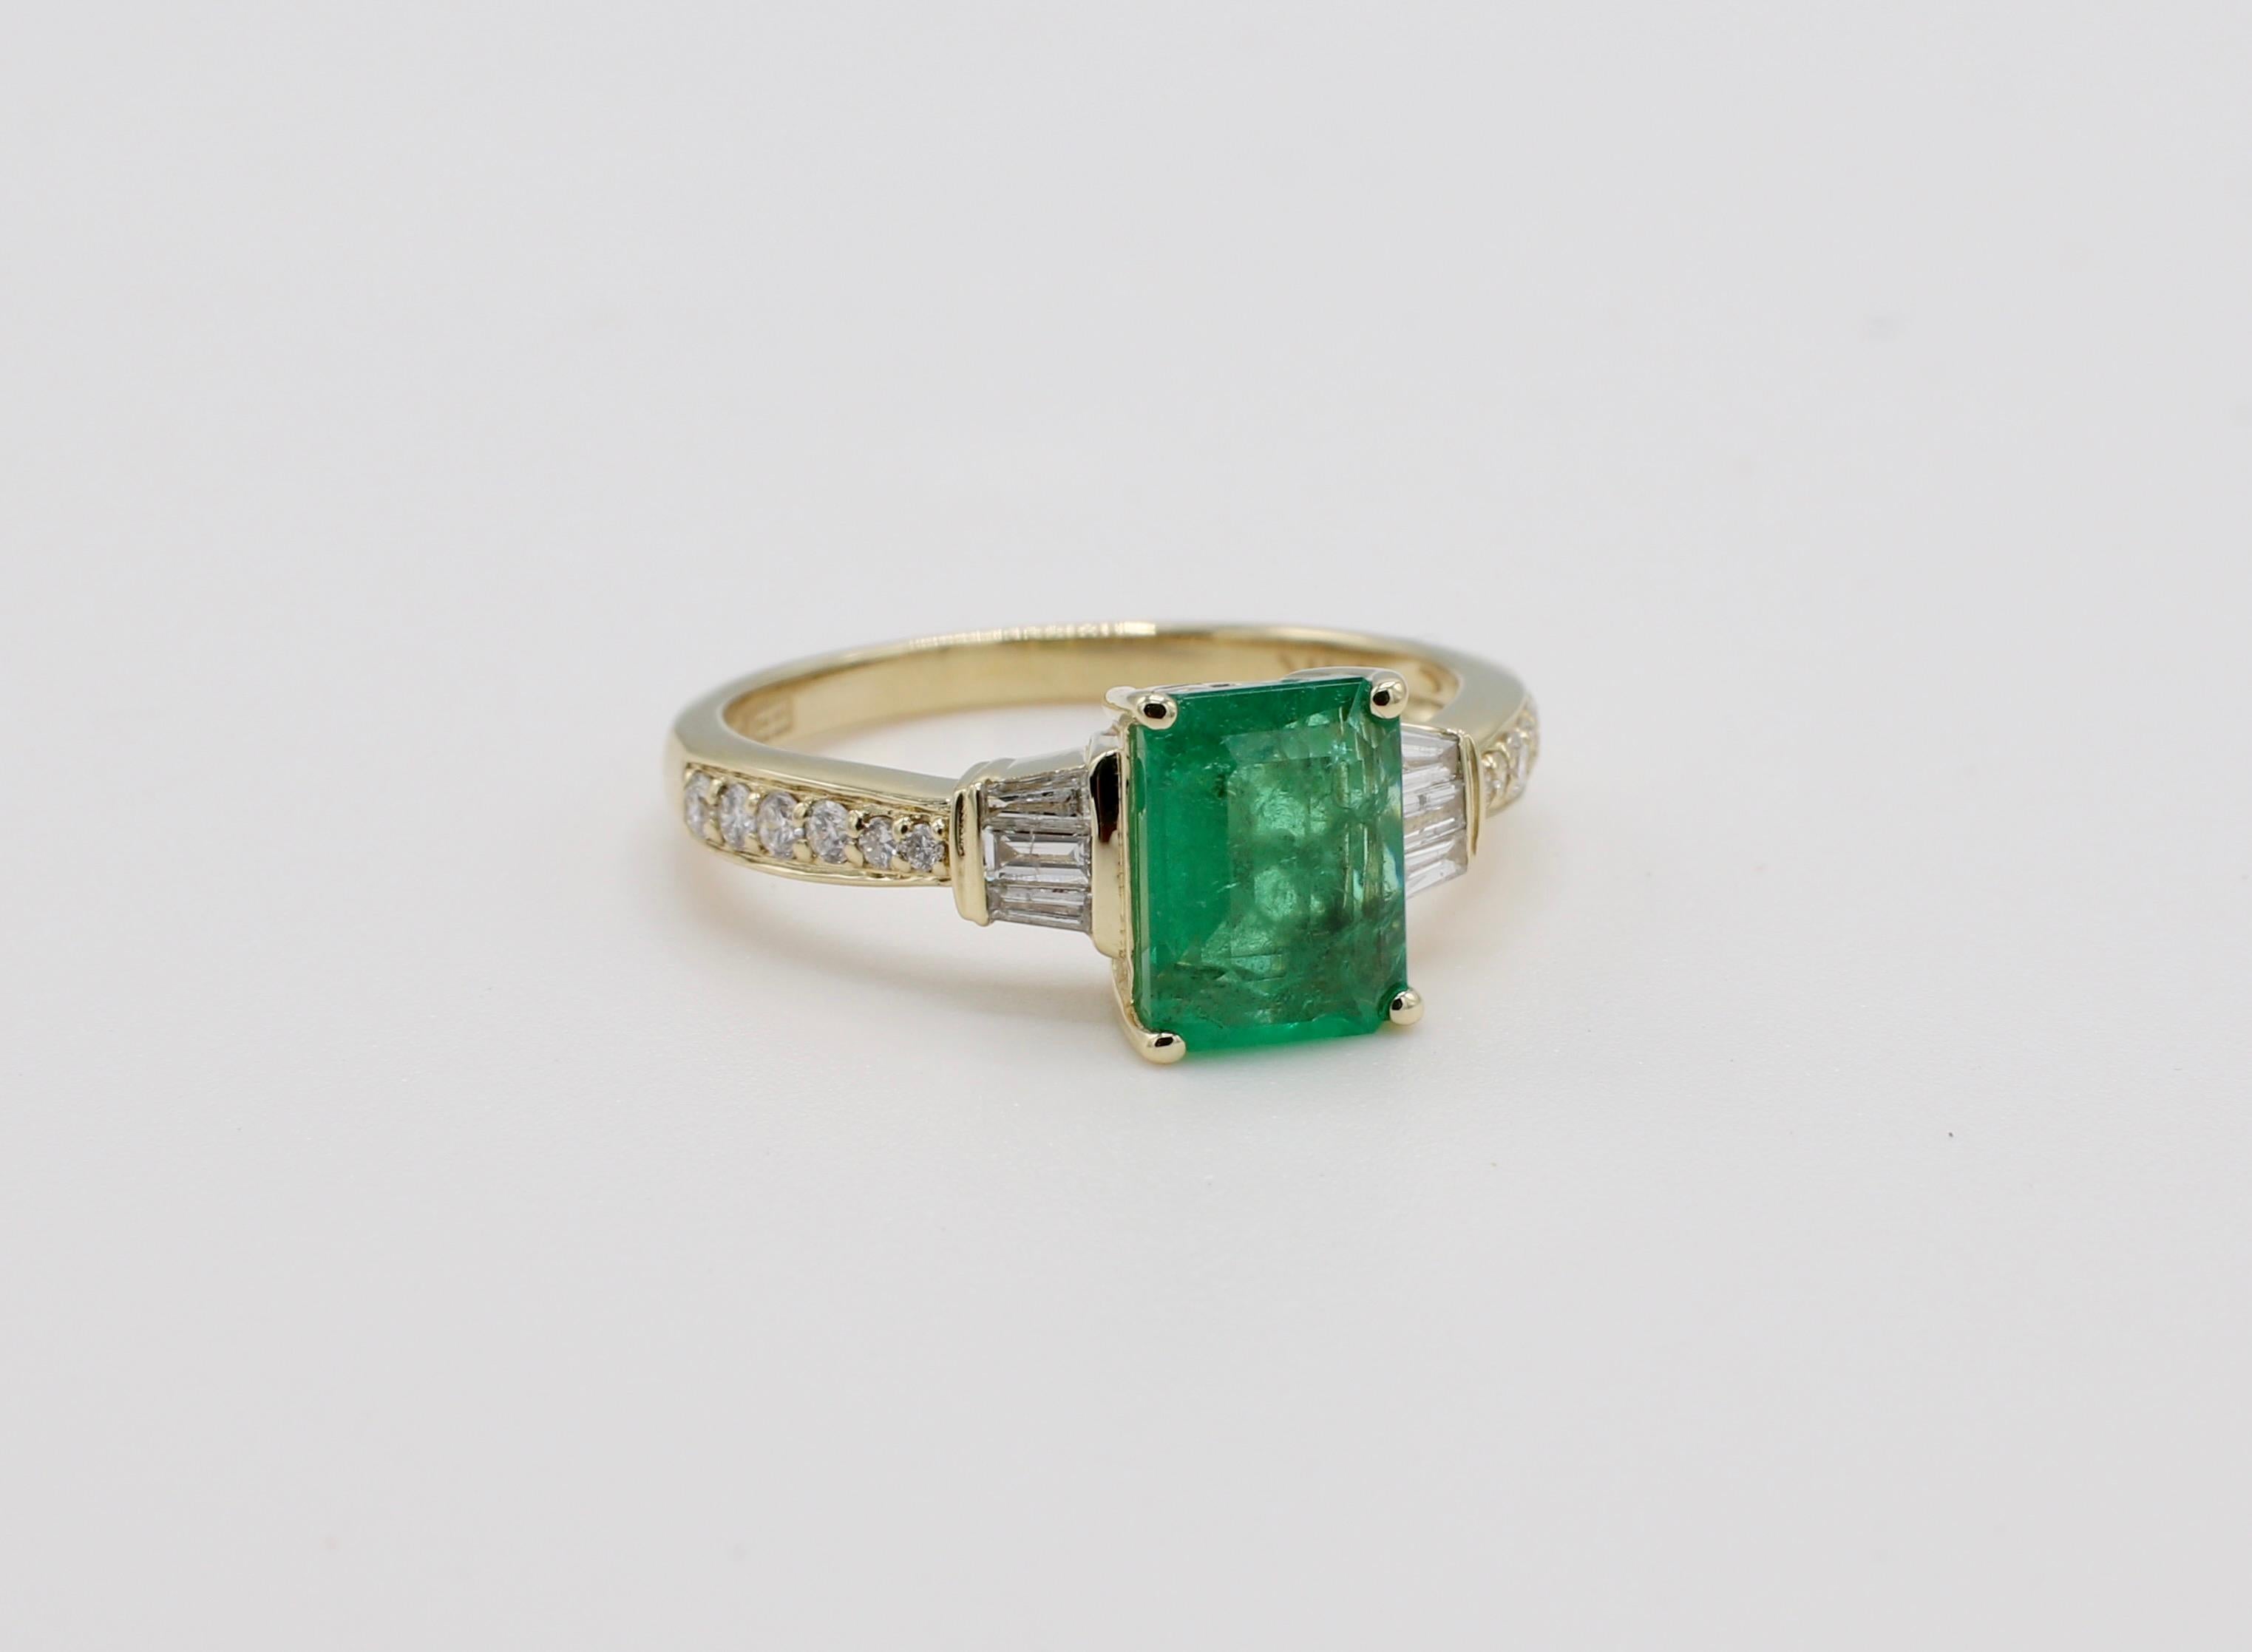 EFFY 14K Yellow Gold Emerald & Diamond Cocktail Ring Size 7
Metal: 14k yellow gold
Weight: 3.1 grams
Emerald: 8.1 x 6.1MM, approx. 1.20 carat
Diamonds: Approx. .40 CTW G SI
Size: 7 (US)
Band is 2MM wide
